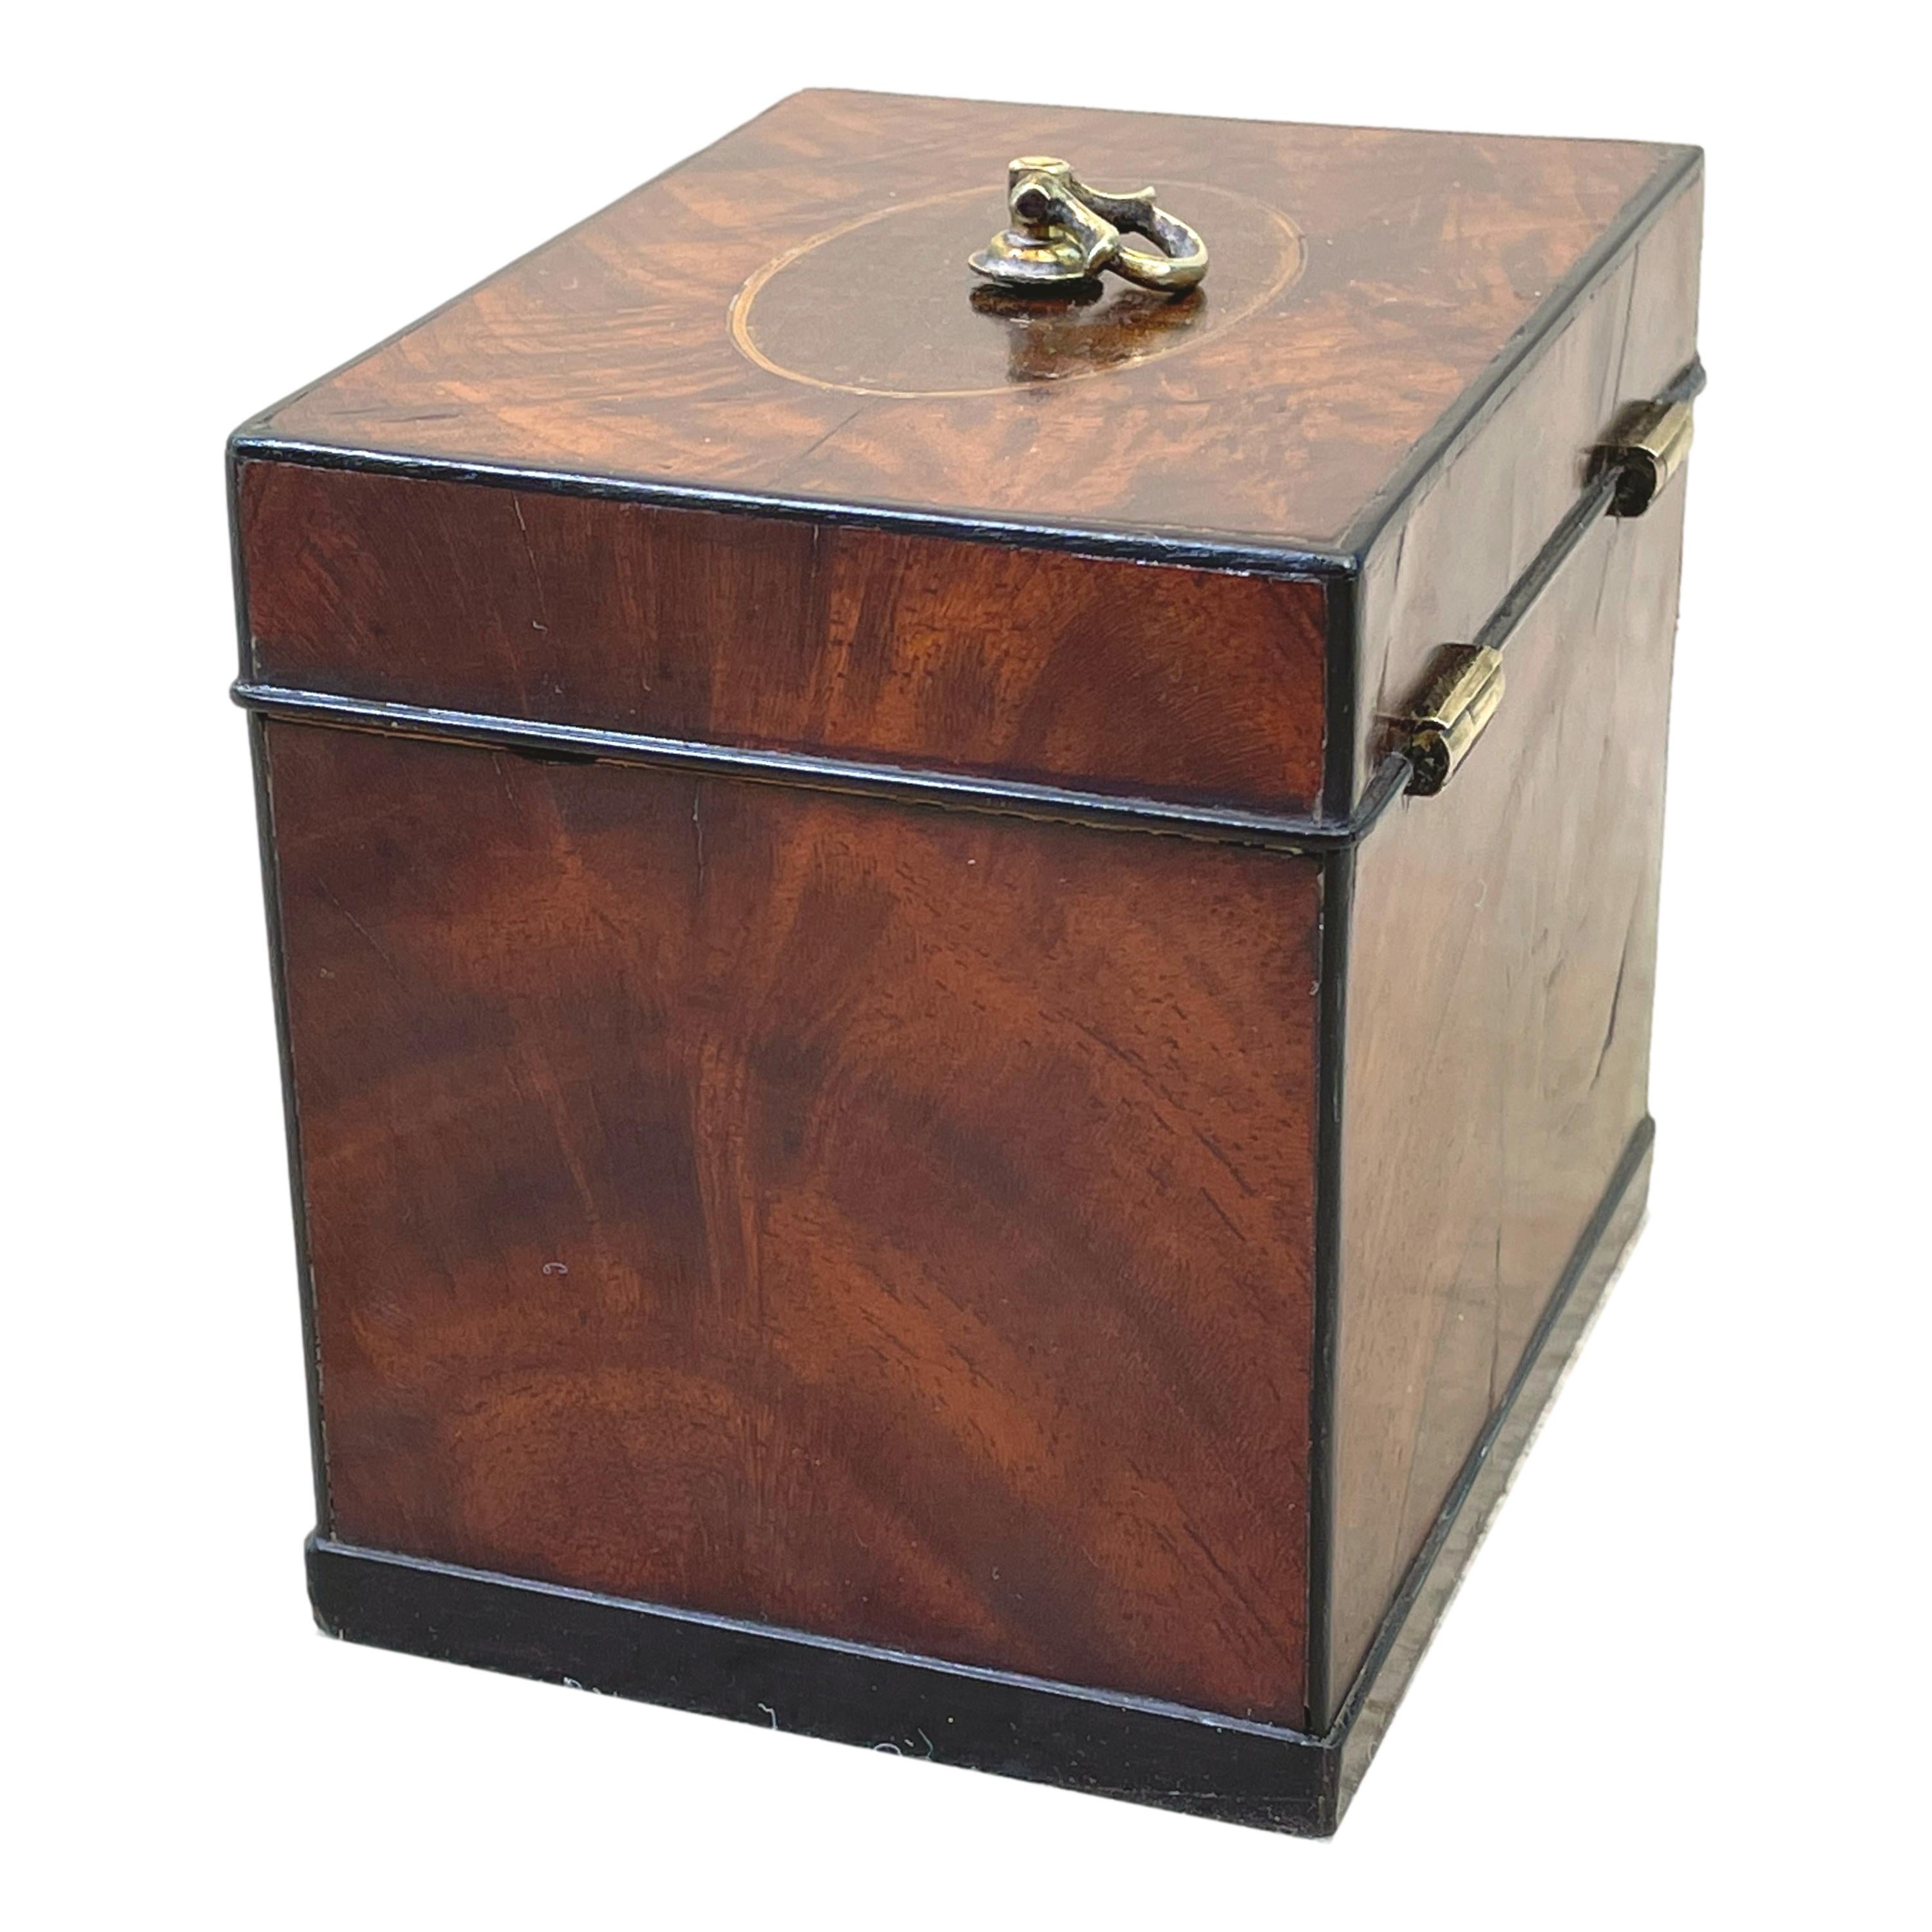 A Good Quality 18th Century Georgian Mahogany
Oblong Tea Caddy Having Well Figured & Inlaid 
Hinged Lid Enclosing Original Paper Lined Interior
With Original Solid Lead Lid

(Tea was a very precious commodity in the 18th century and
tea